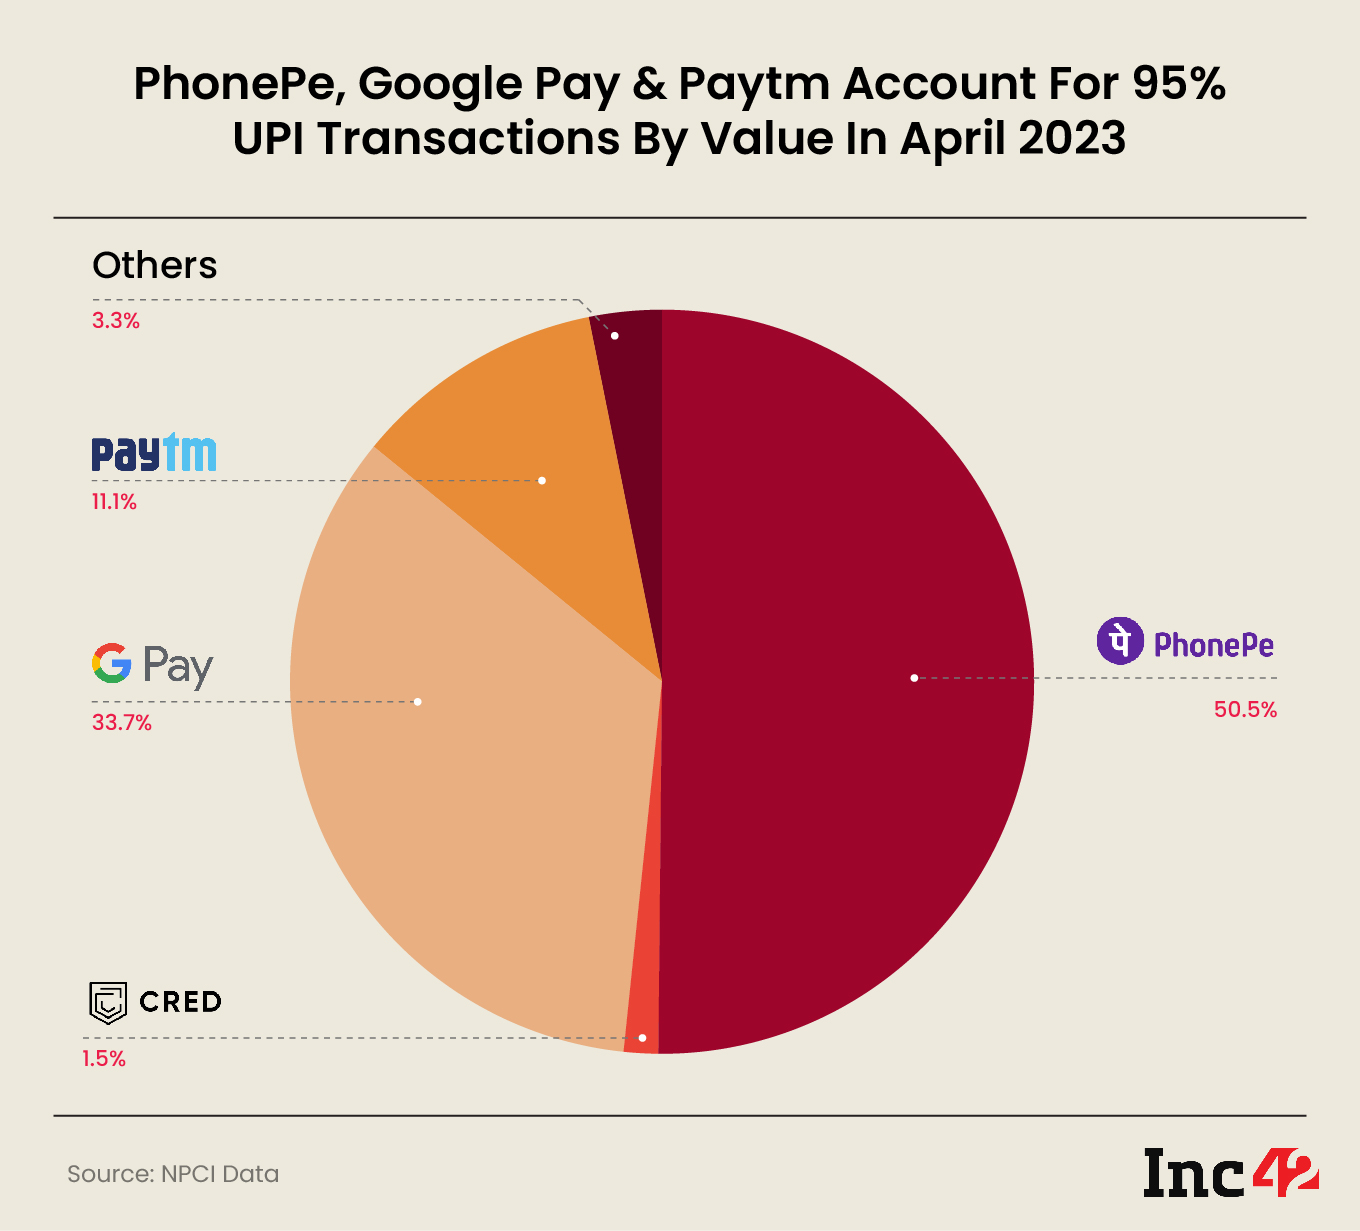 PhonePe, Google Pay, Paytm Accounted For 97% Of UPI Transactions In April